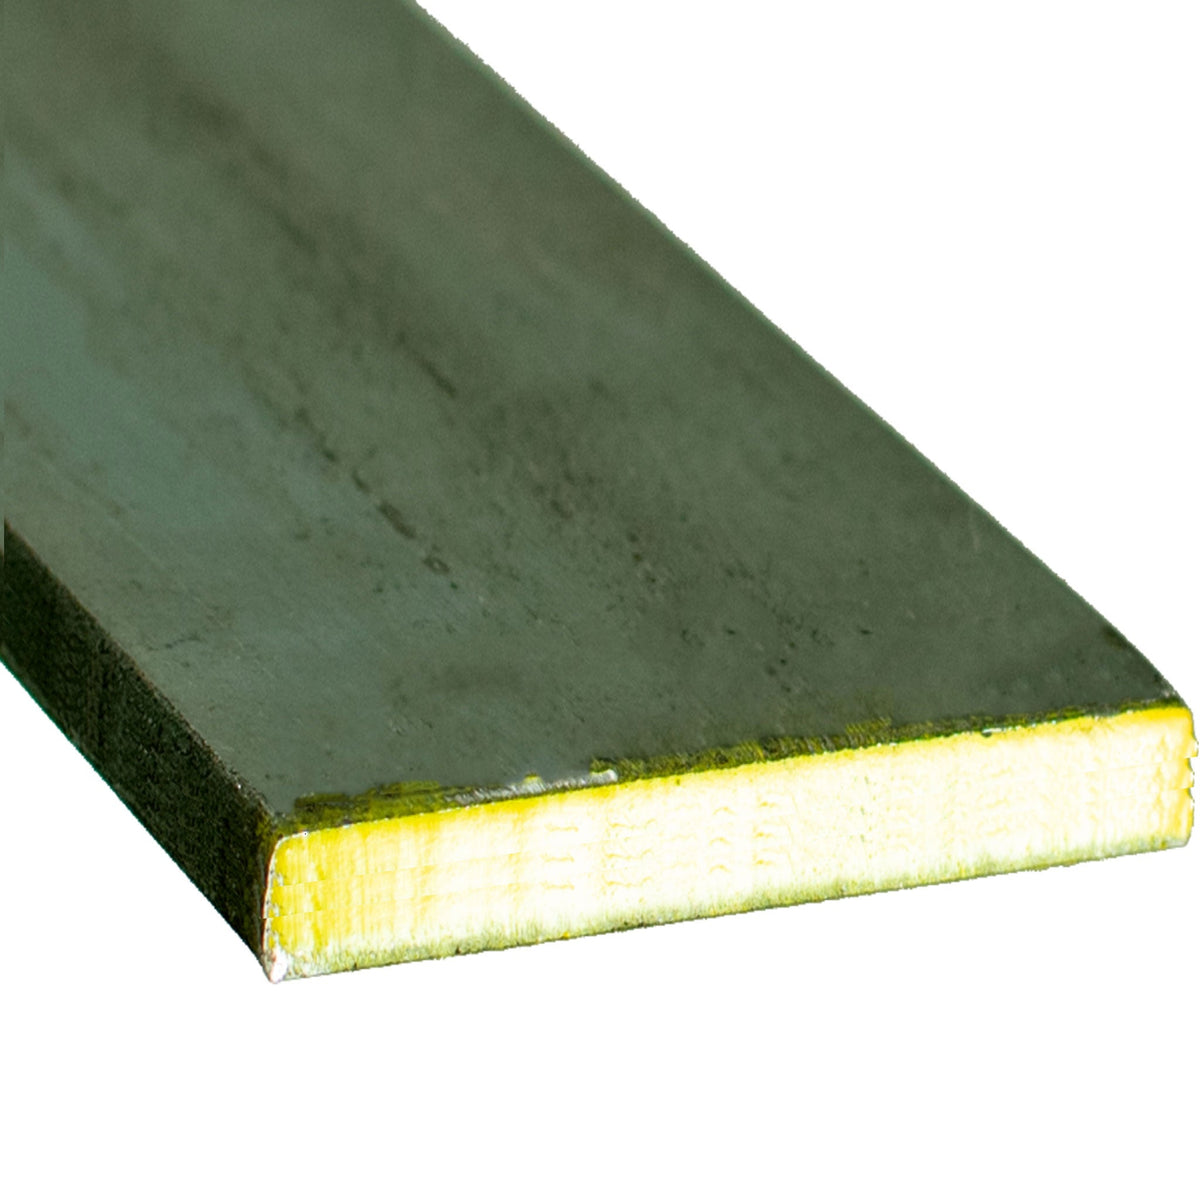 Flat Bar Steel 1/4in Thick Sold in varying widths and lengths from leedisplay.com